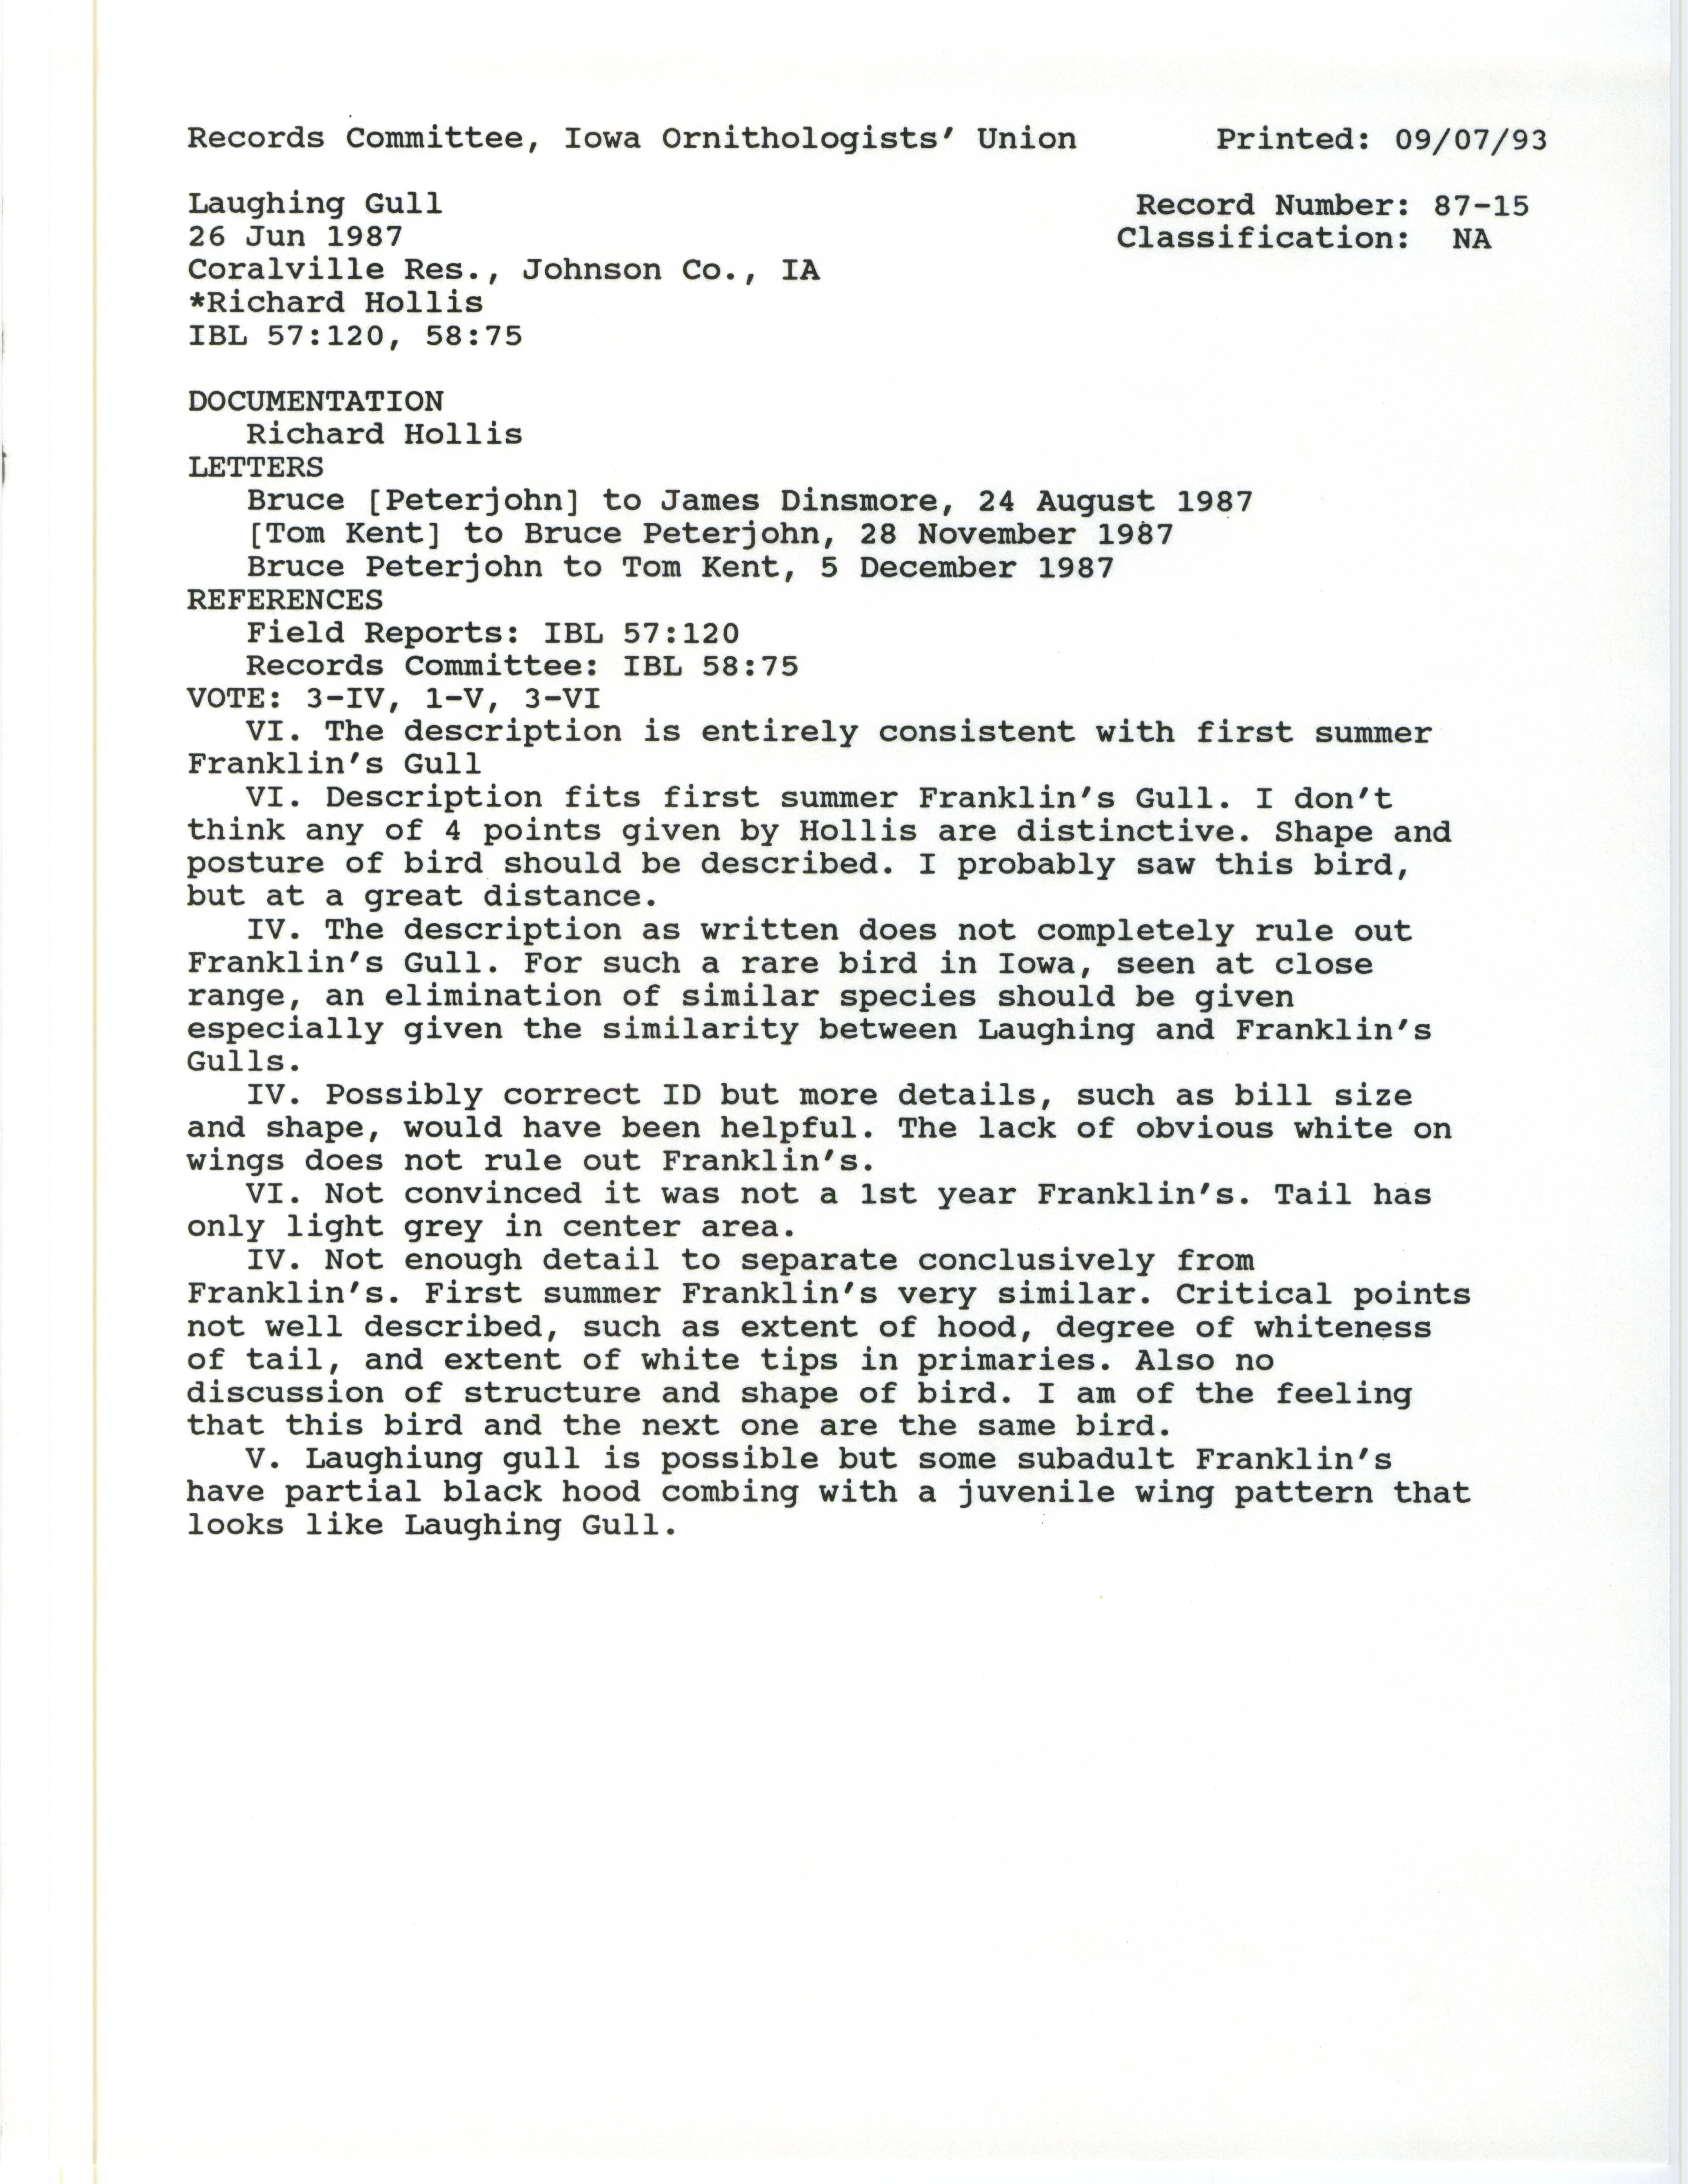 Records Committee review for rare bird sighting of Laughing Gull at Hawkeye Wildlife Area, 1987